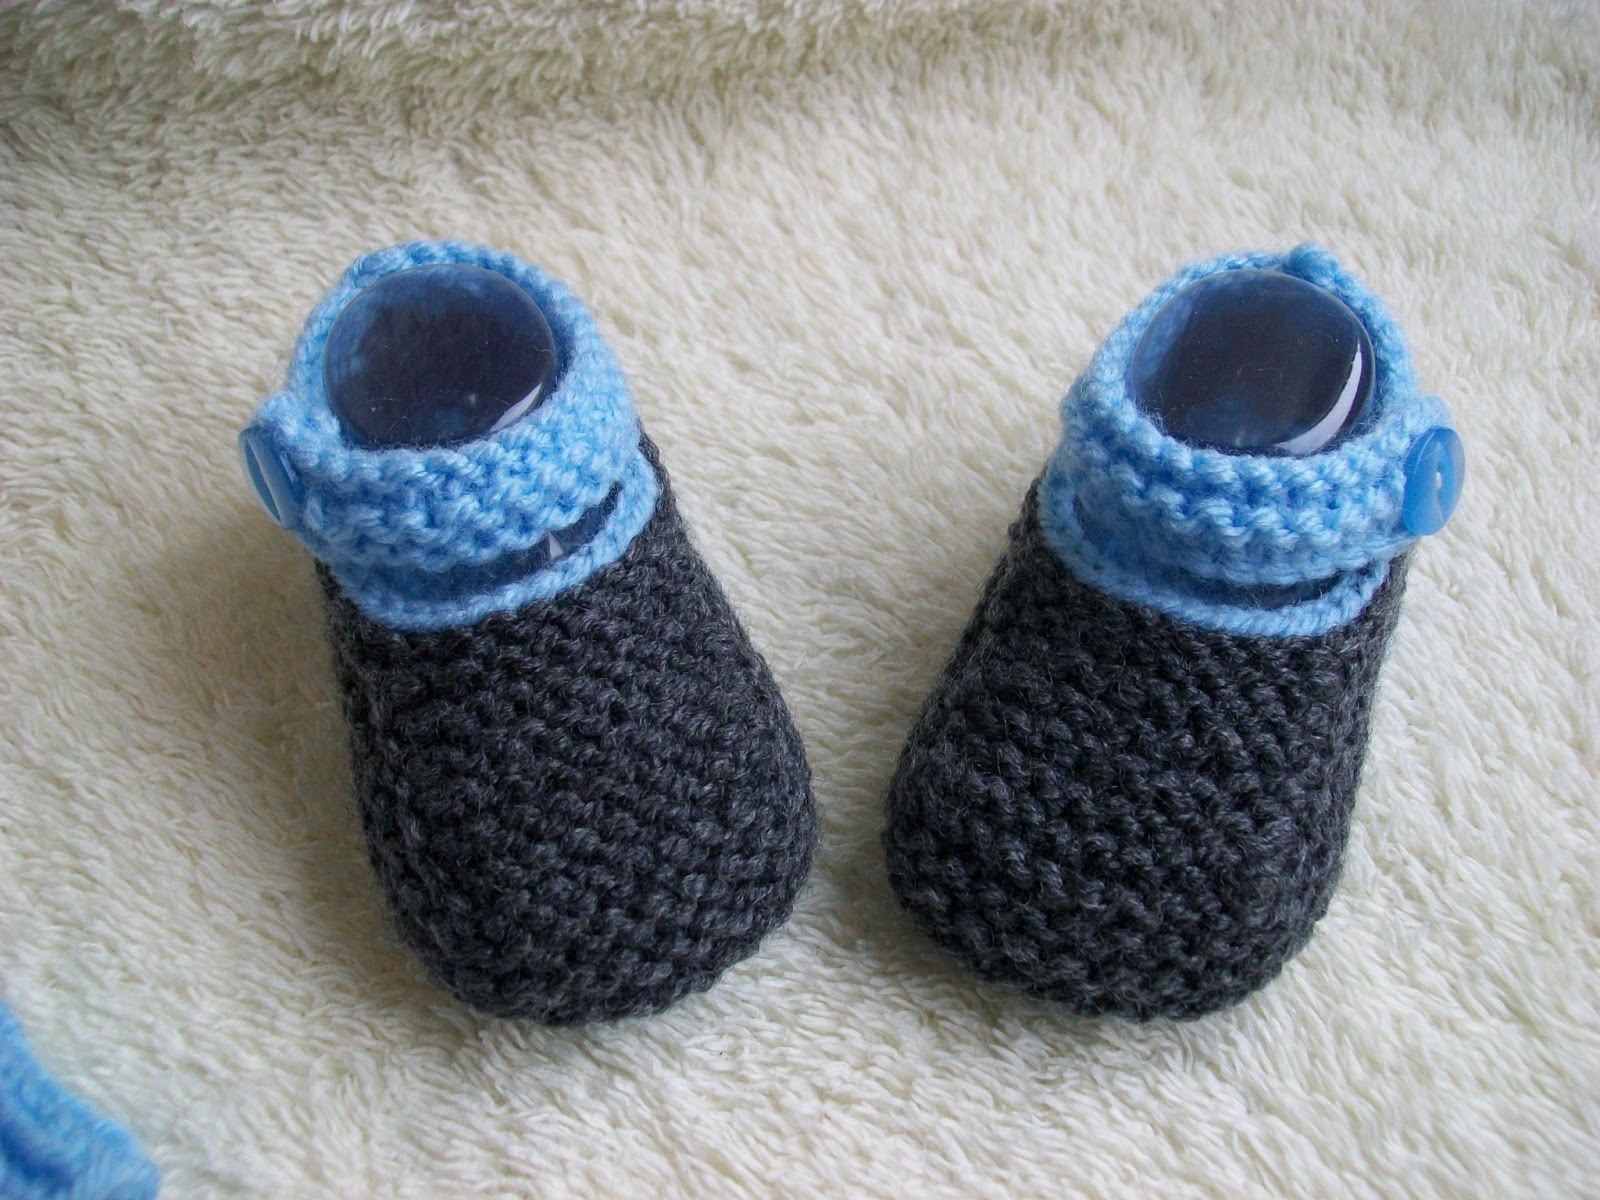 Knitting Patterns For Baby Booties 30 Free Patterns For Knitted Ba Booties Guide Patterns